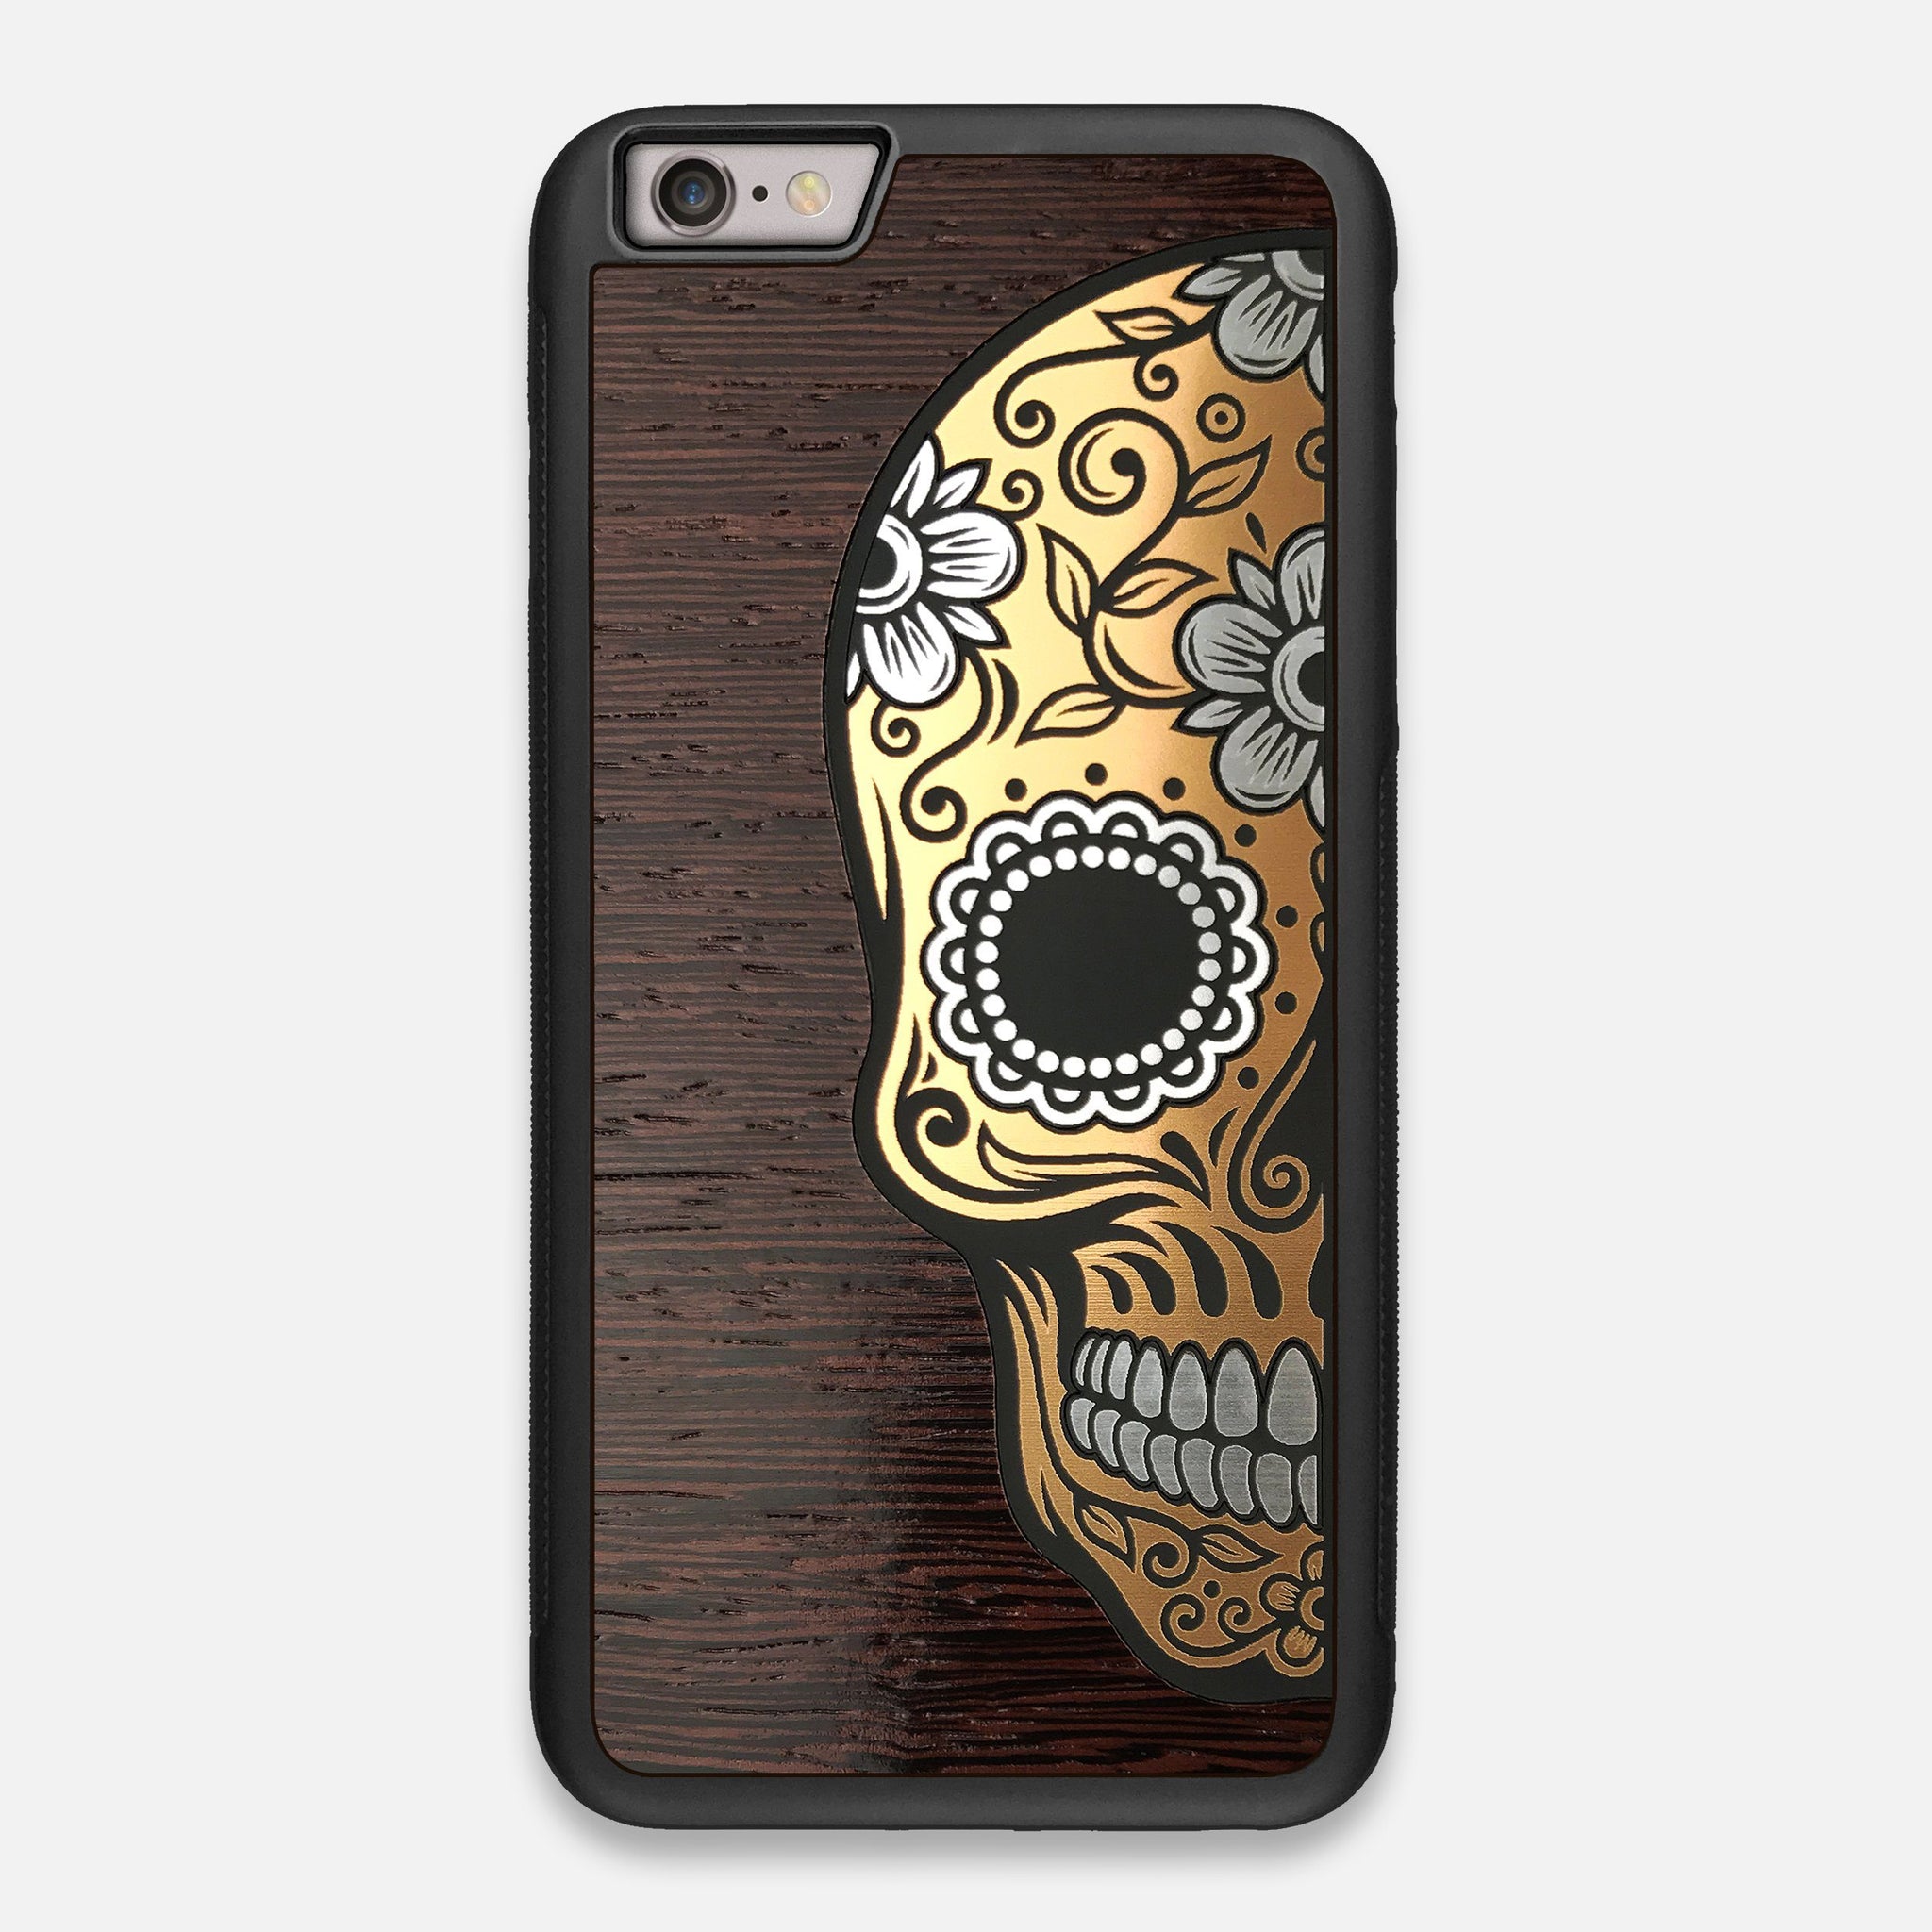 Front view of the Calavera Wood Sugar Skull Wood iPhone 6 Plus Case by Keyway Designs